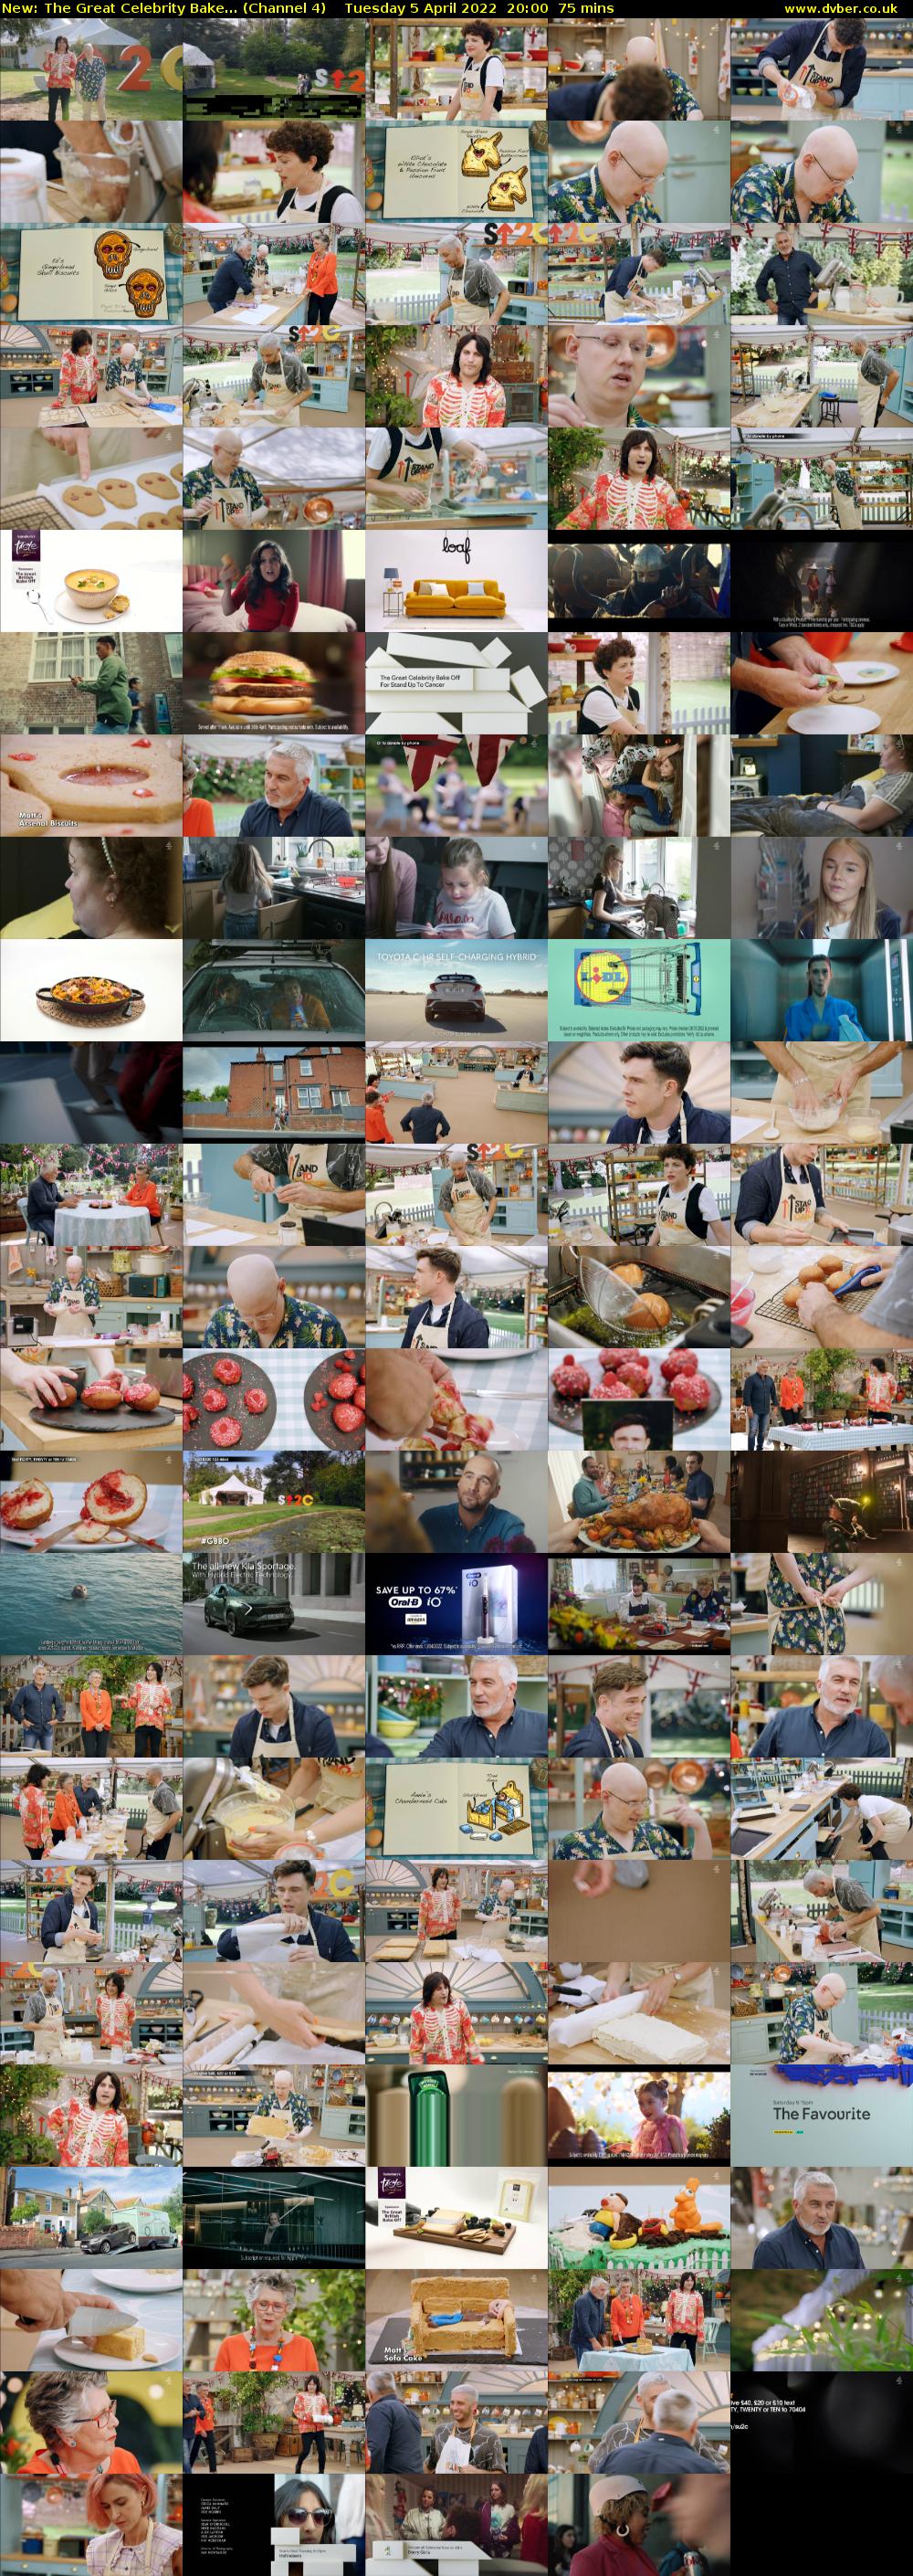 The Great Celebrity Bake... (Channel 4) Tuesday 5 April 2022 20:00 - 21:15